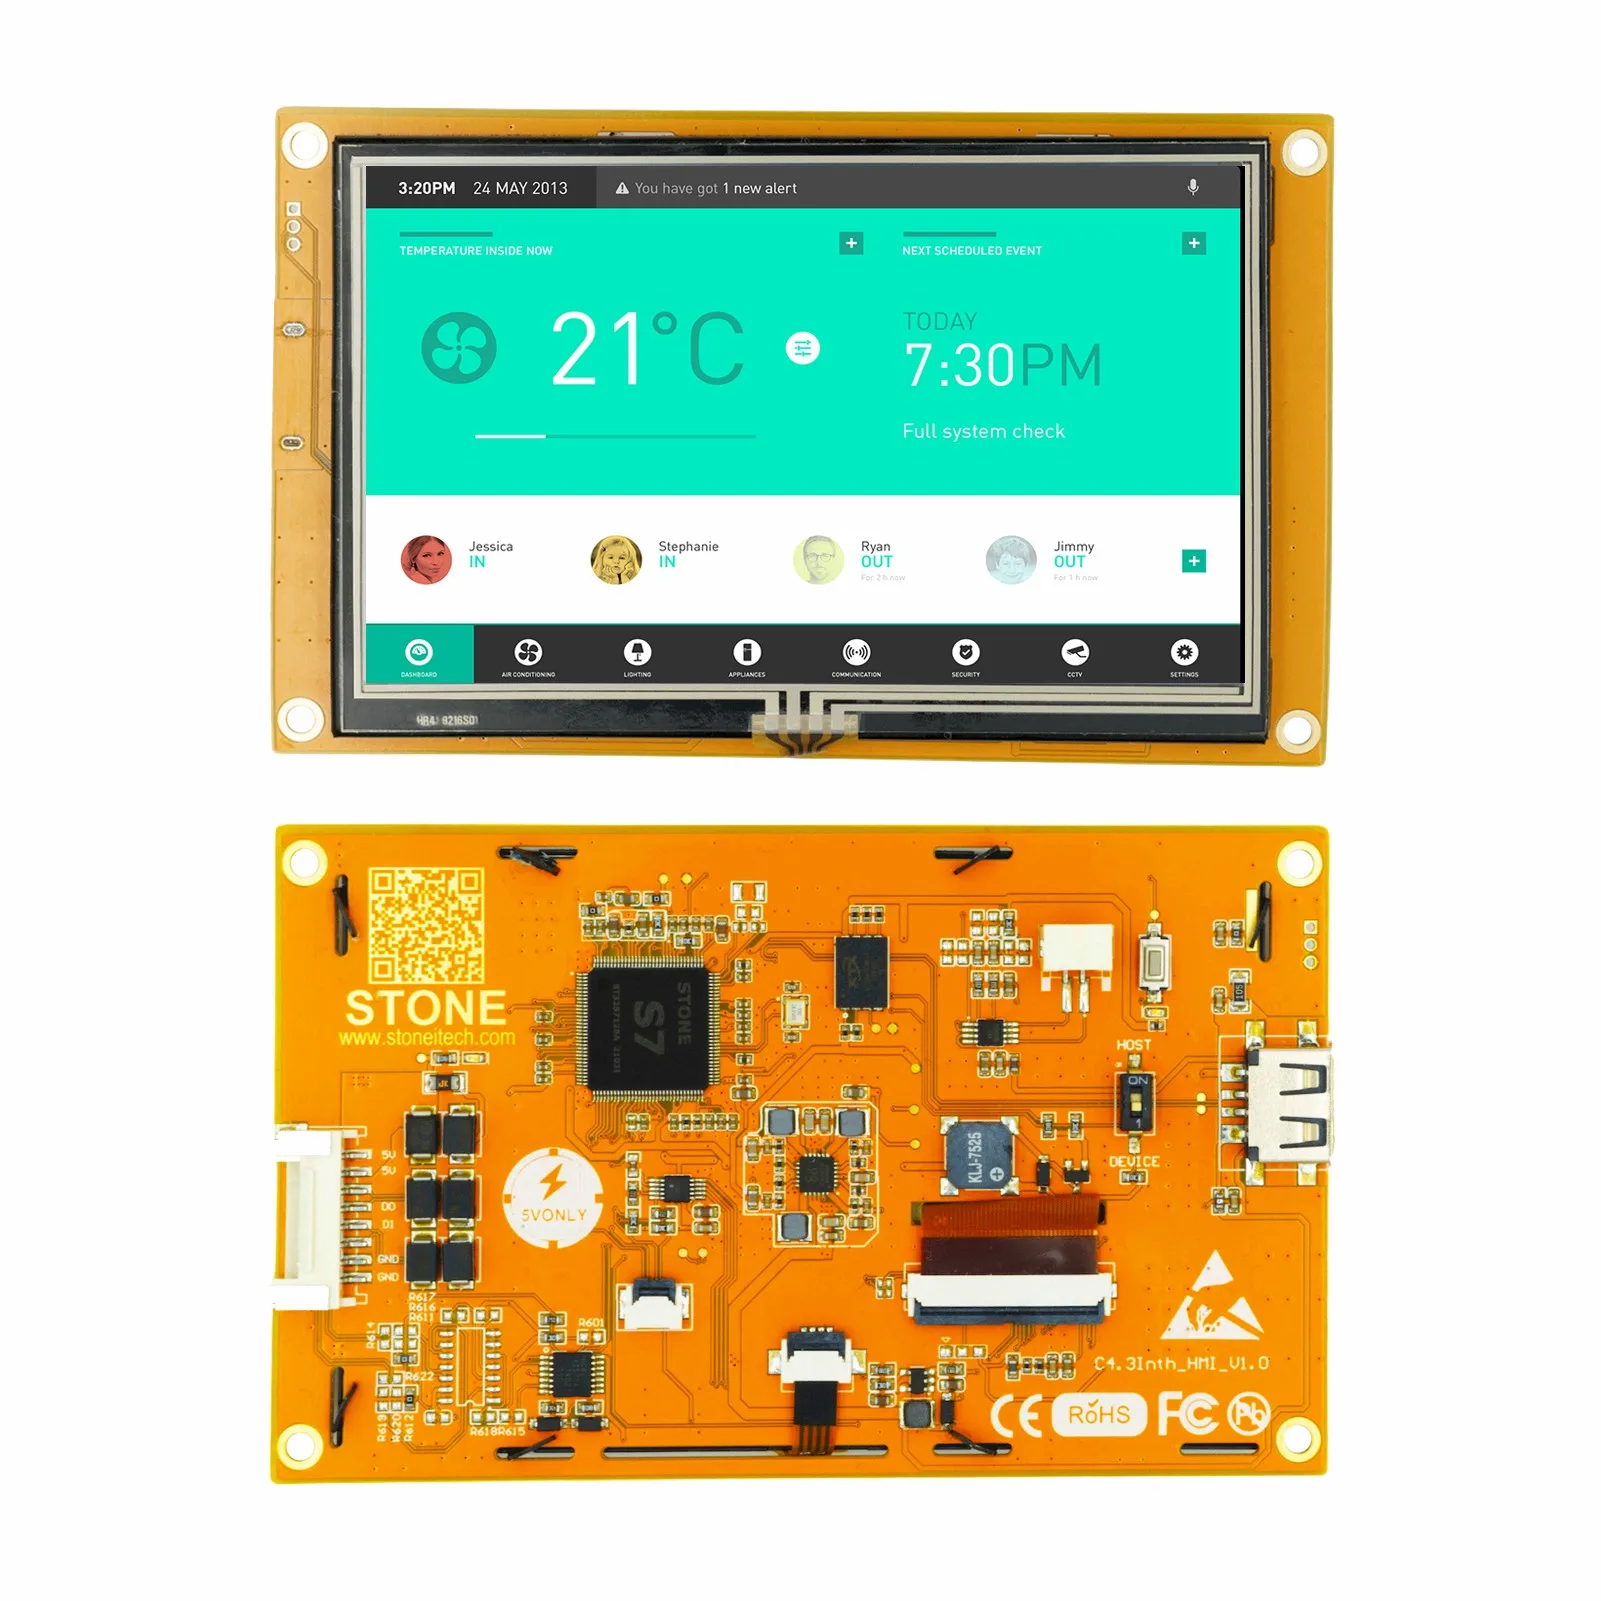 SCBRHMI - 4.3'' Full-color HMI Intelligent LCD Resistive Touch Display Module Easy To Operate for Basic Programmers